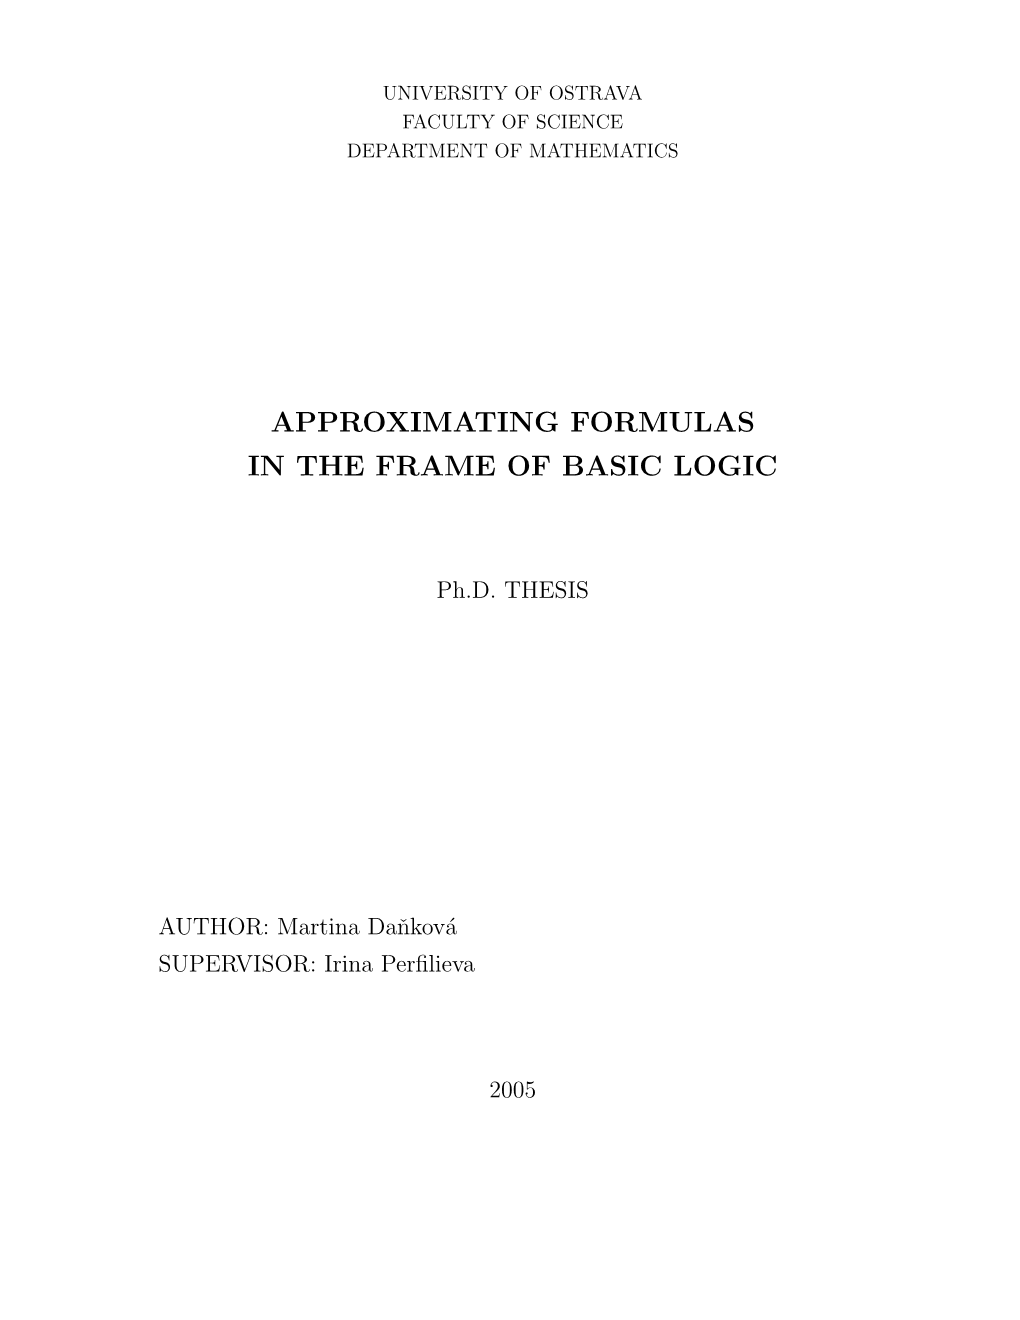 Approximating Formulas in the Frame of Basic Logic